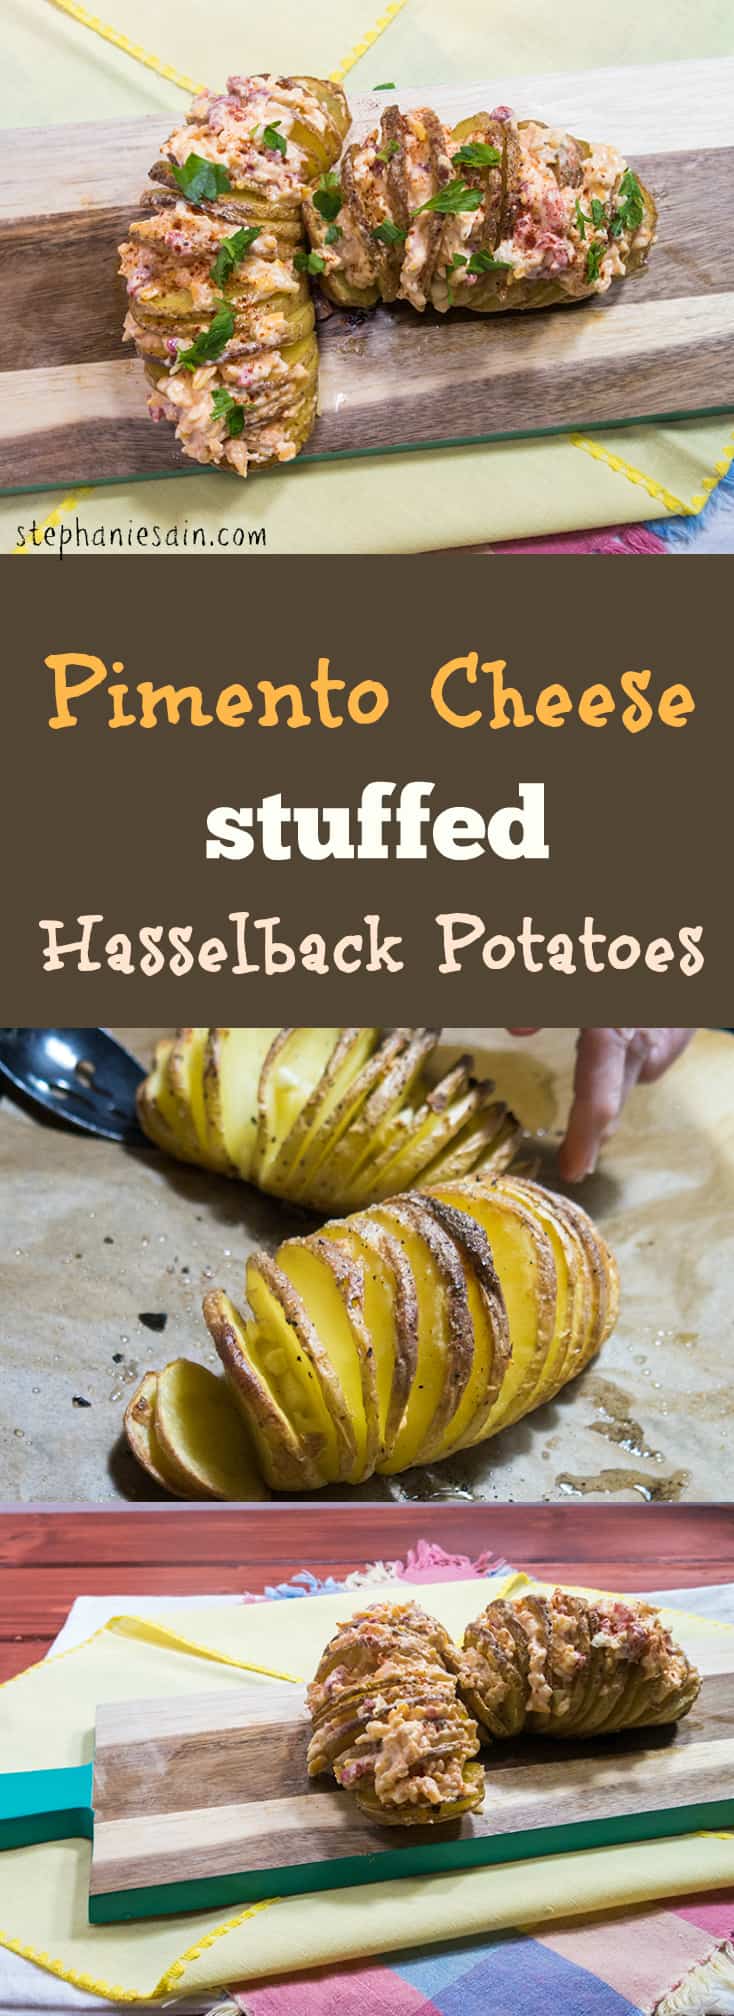 Pimento Cheese Stuffed Hasselback Potatoes are a tasty side dish or also great served as an appetizer. Vegetarian and Gluten Free.